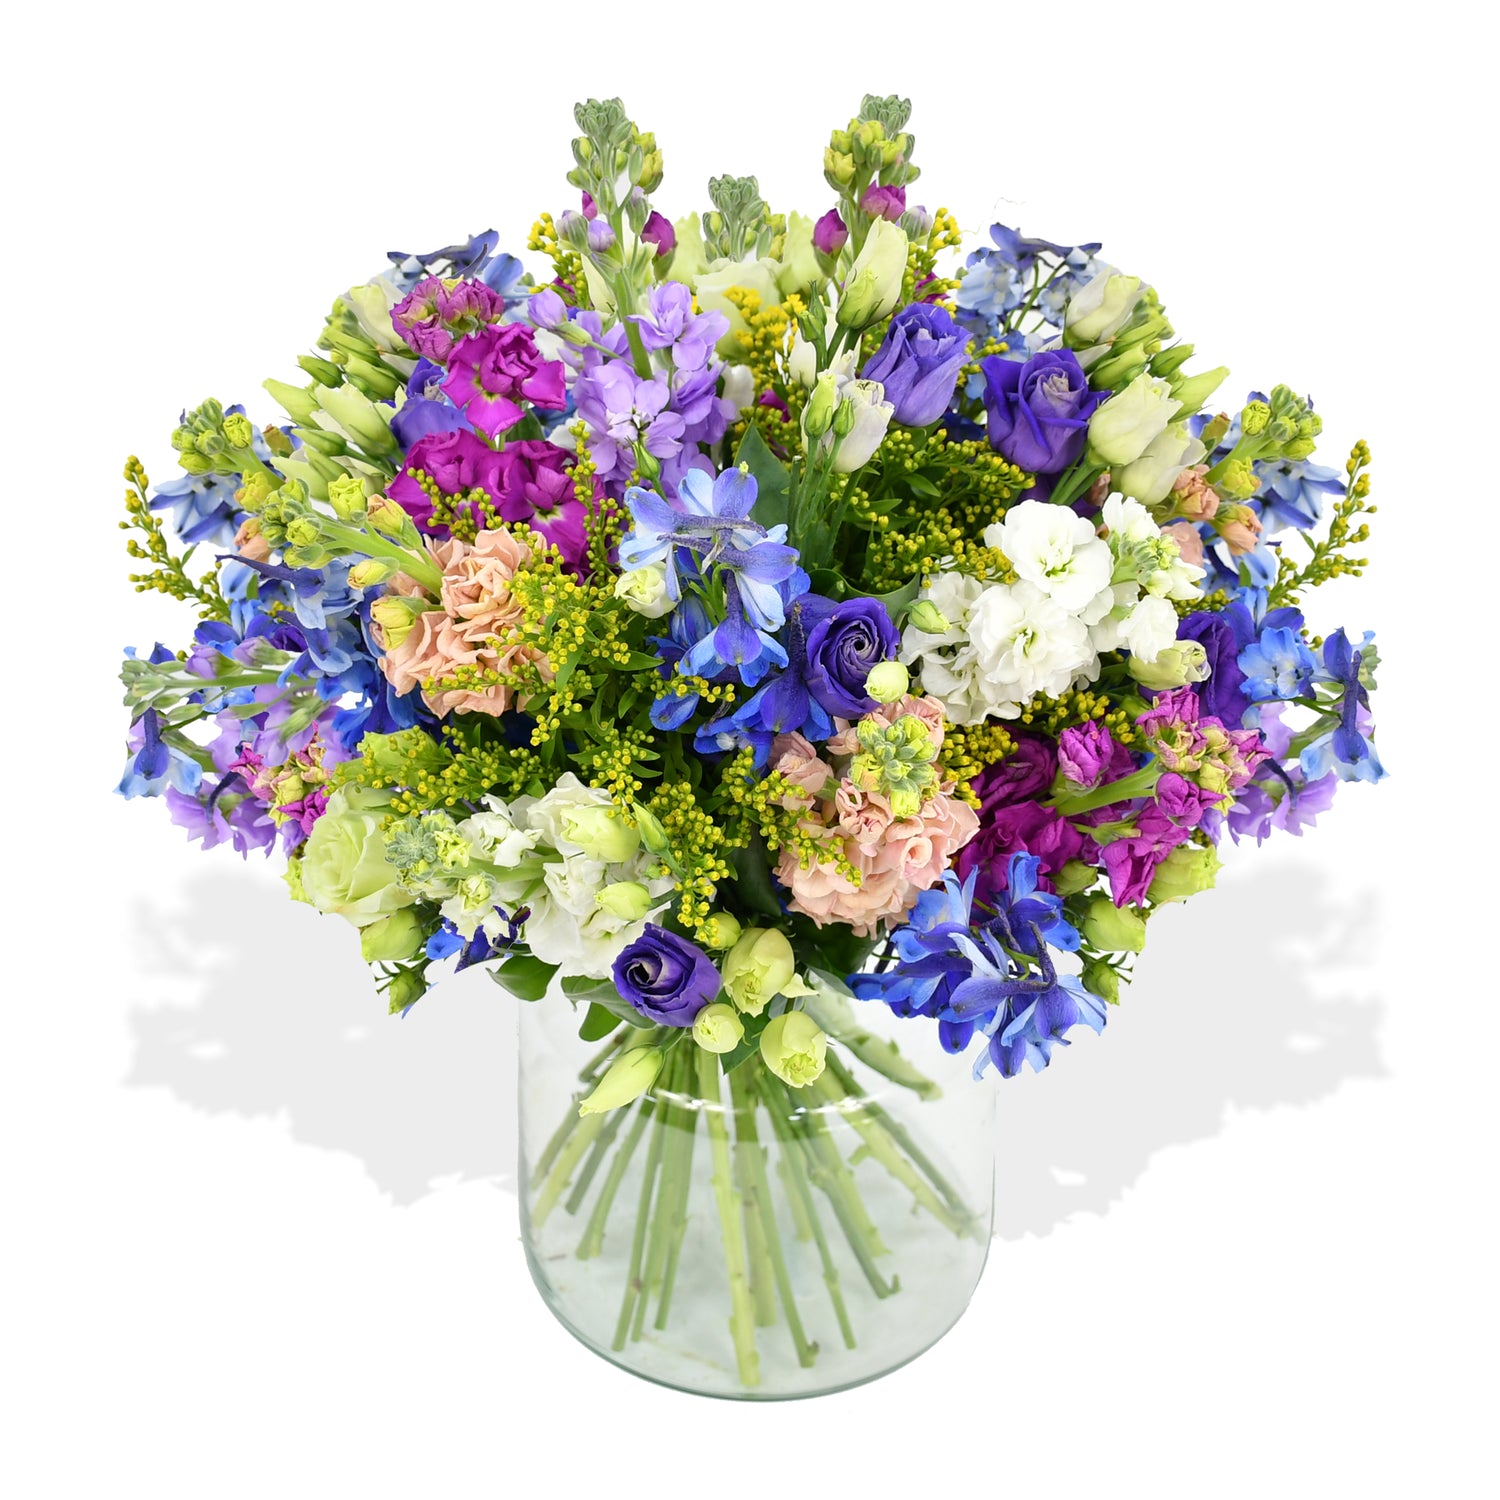 stocks and blue delphinium in a vase